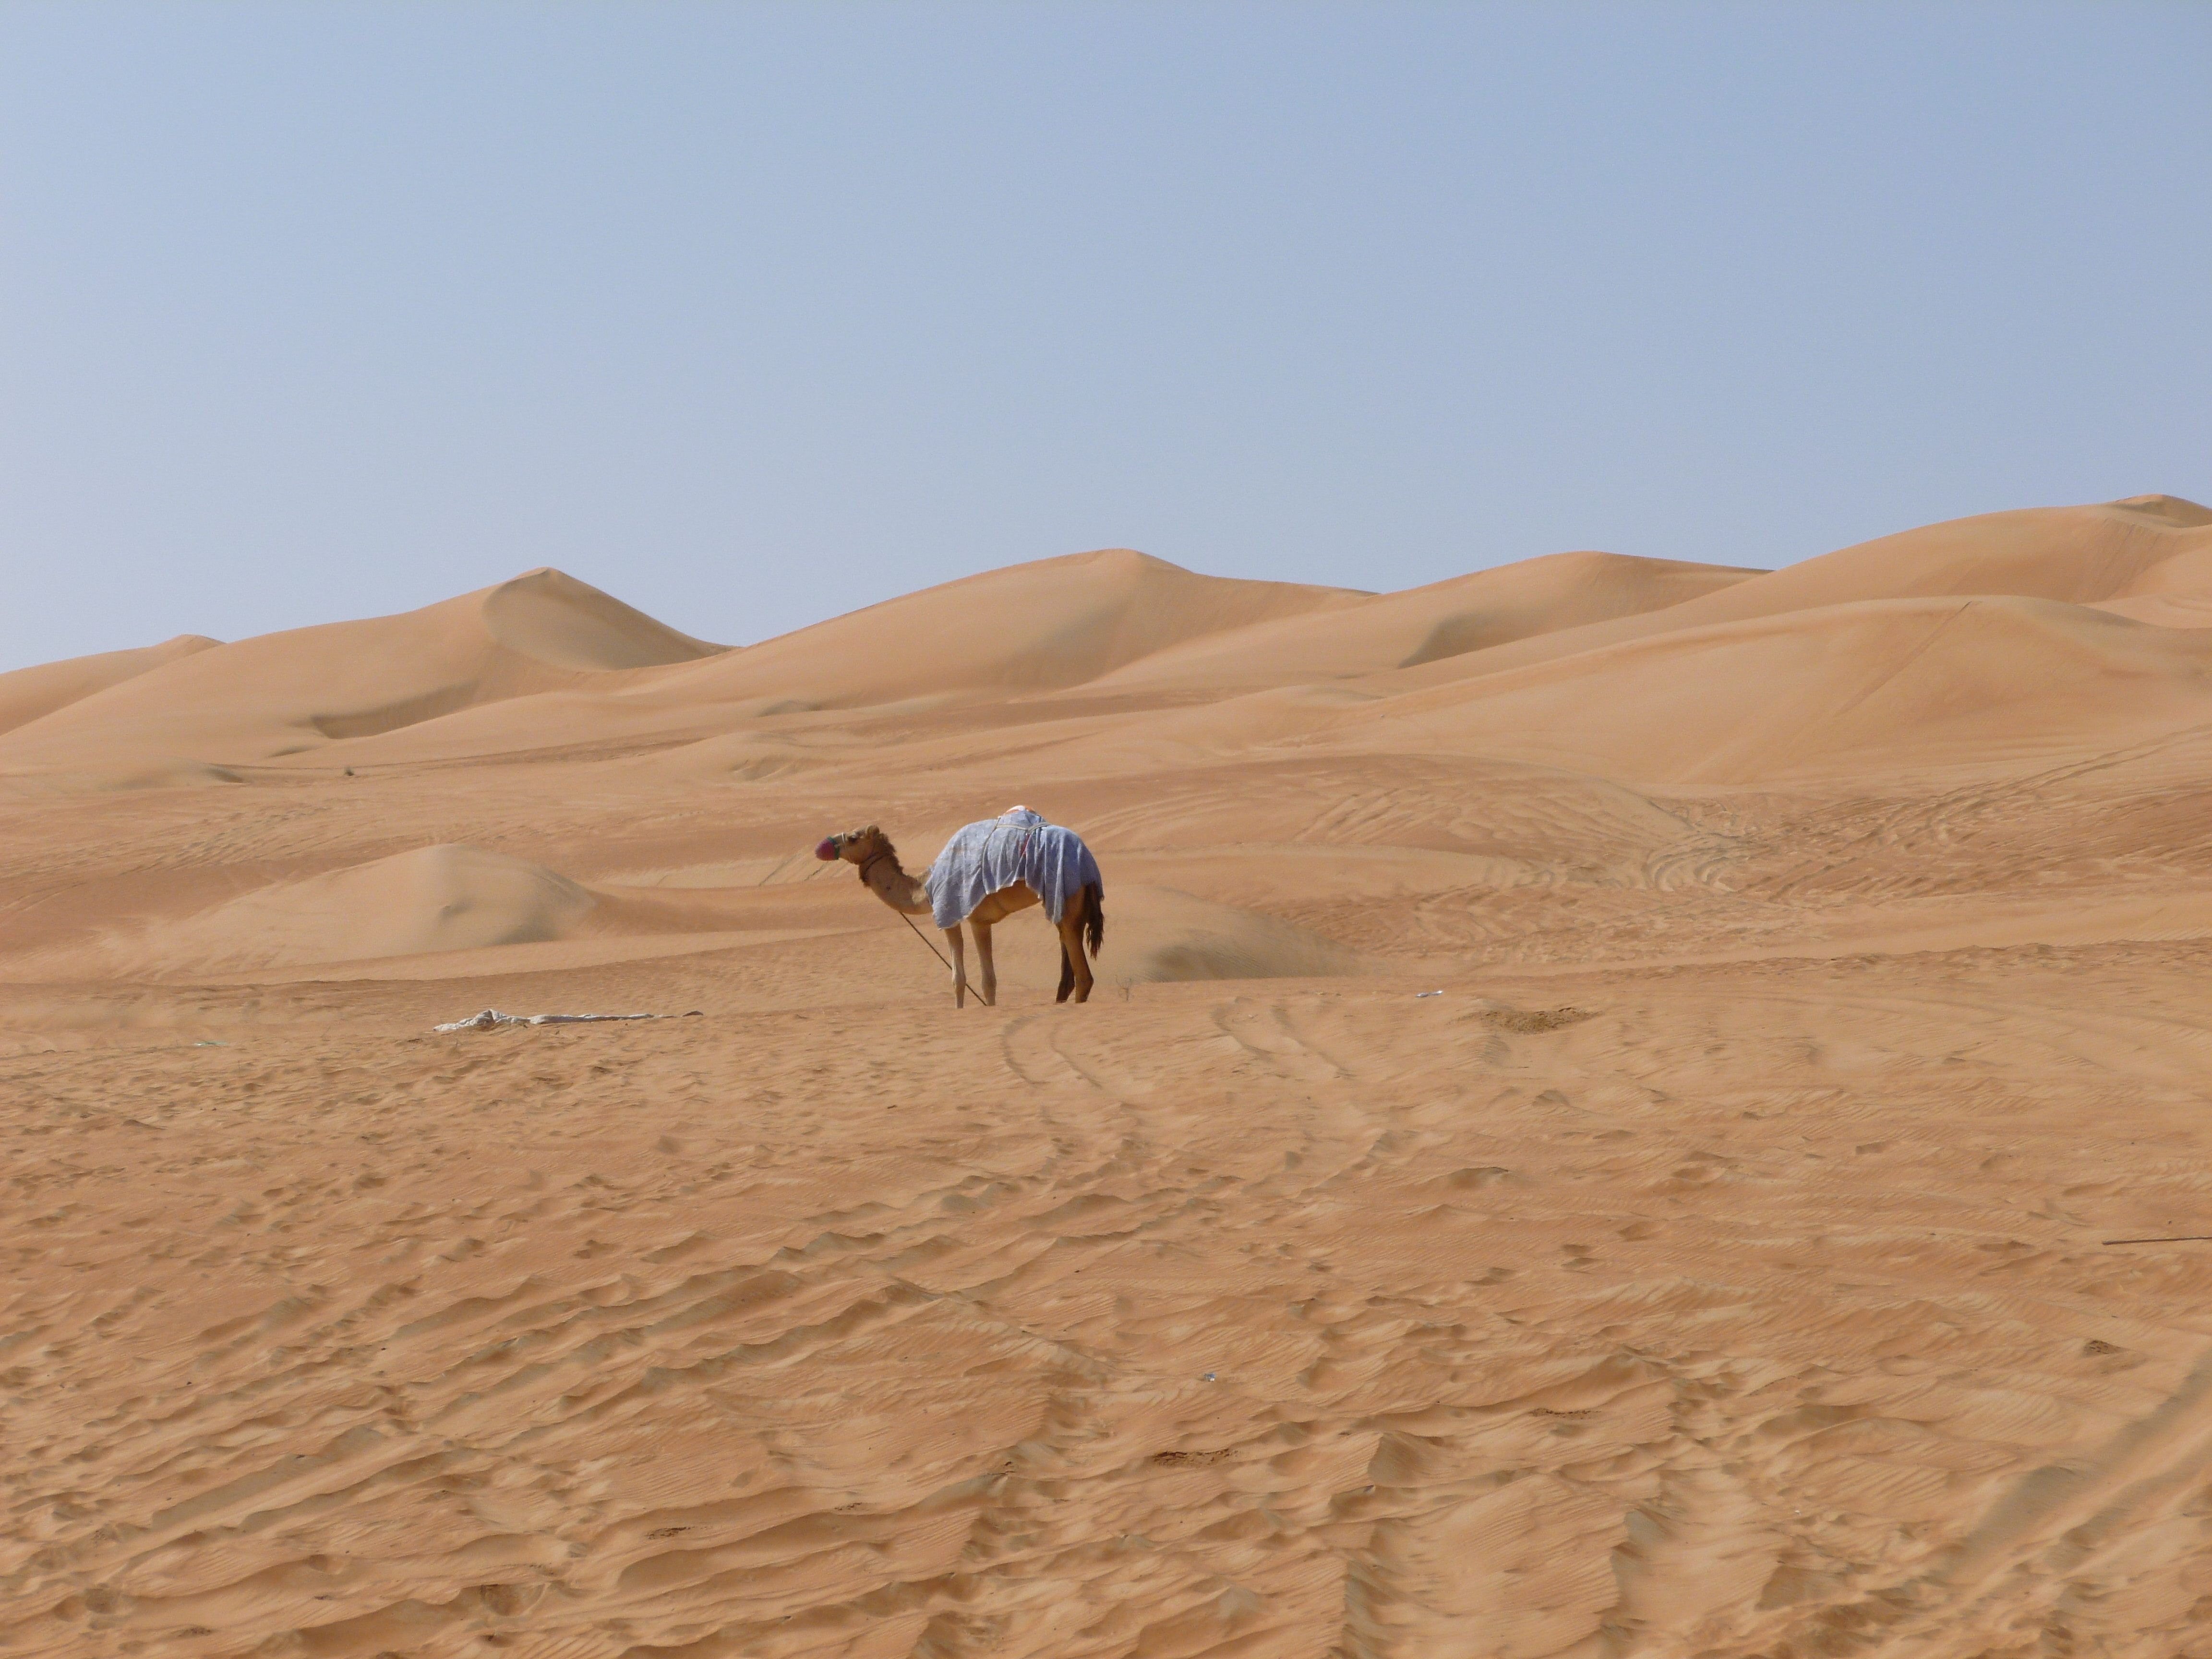 Stock photo of a camel in the desert in Oman